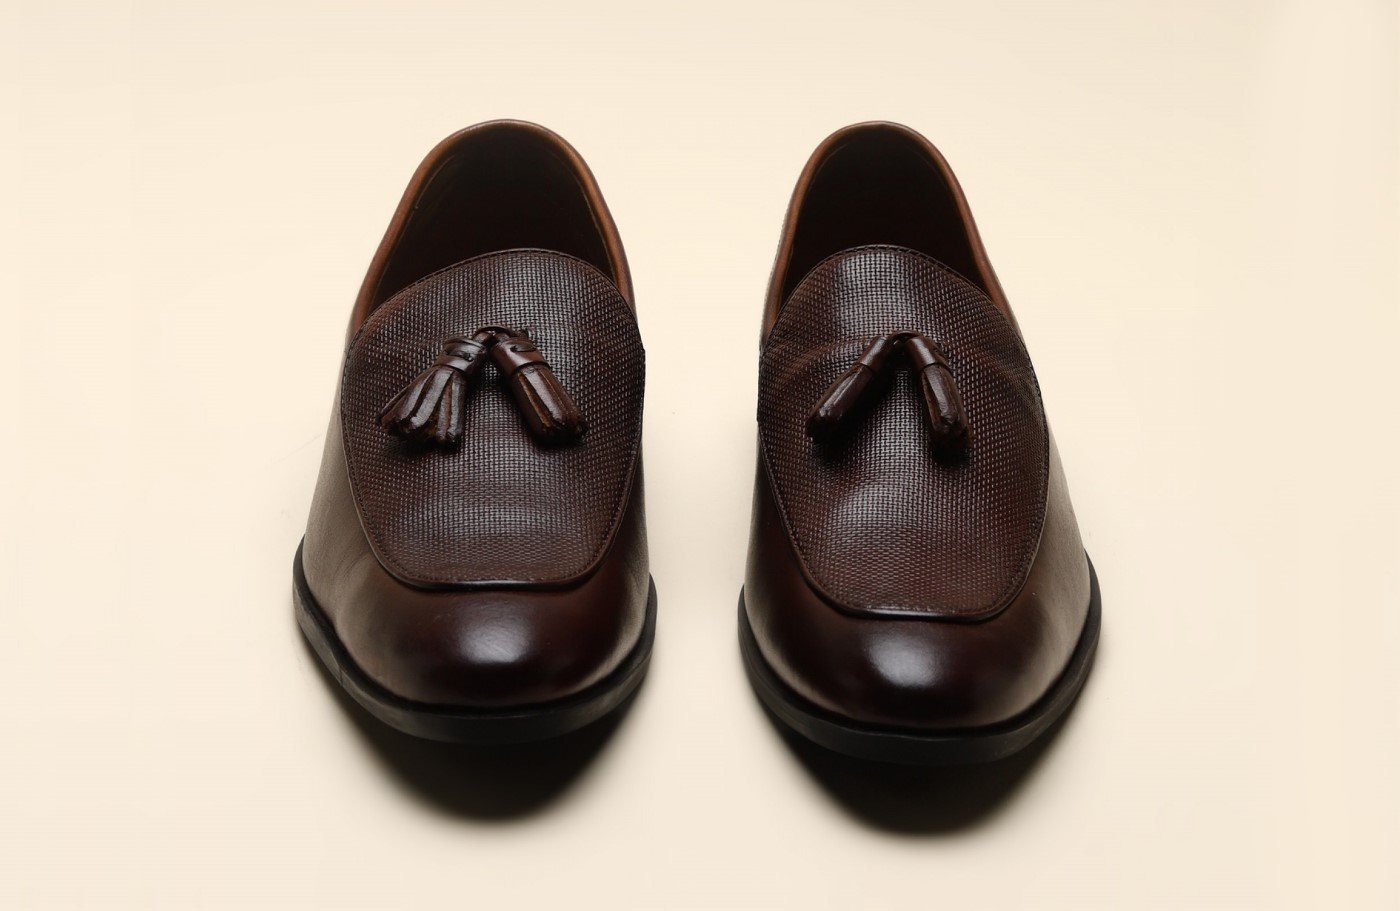 Footwear Styling Rules All Men Should Know